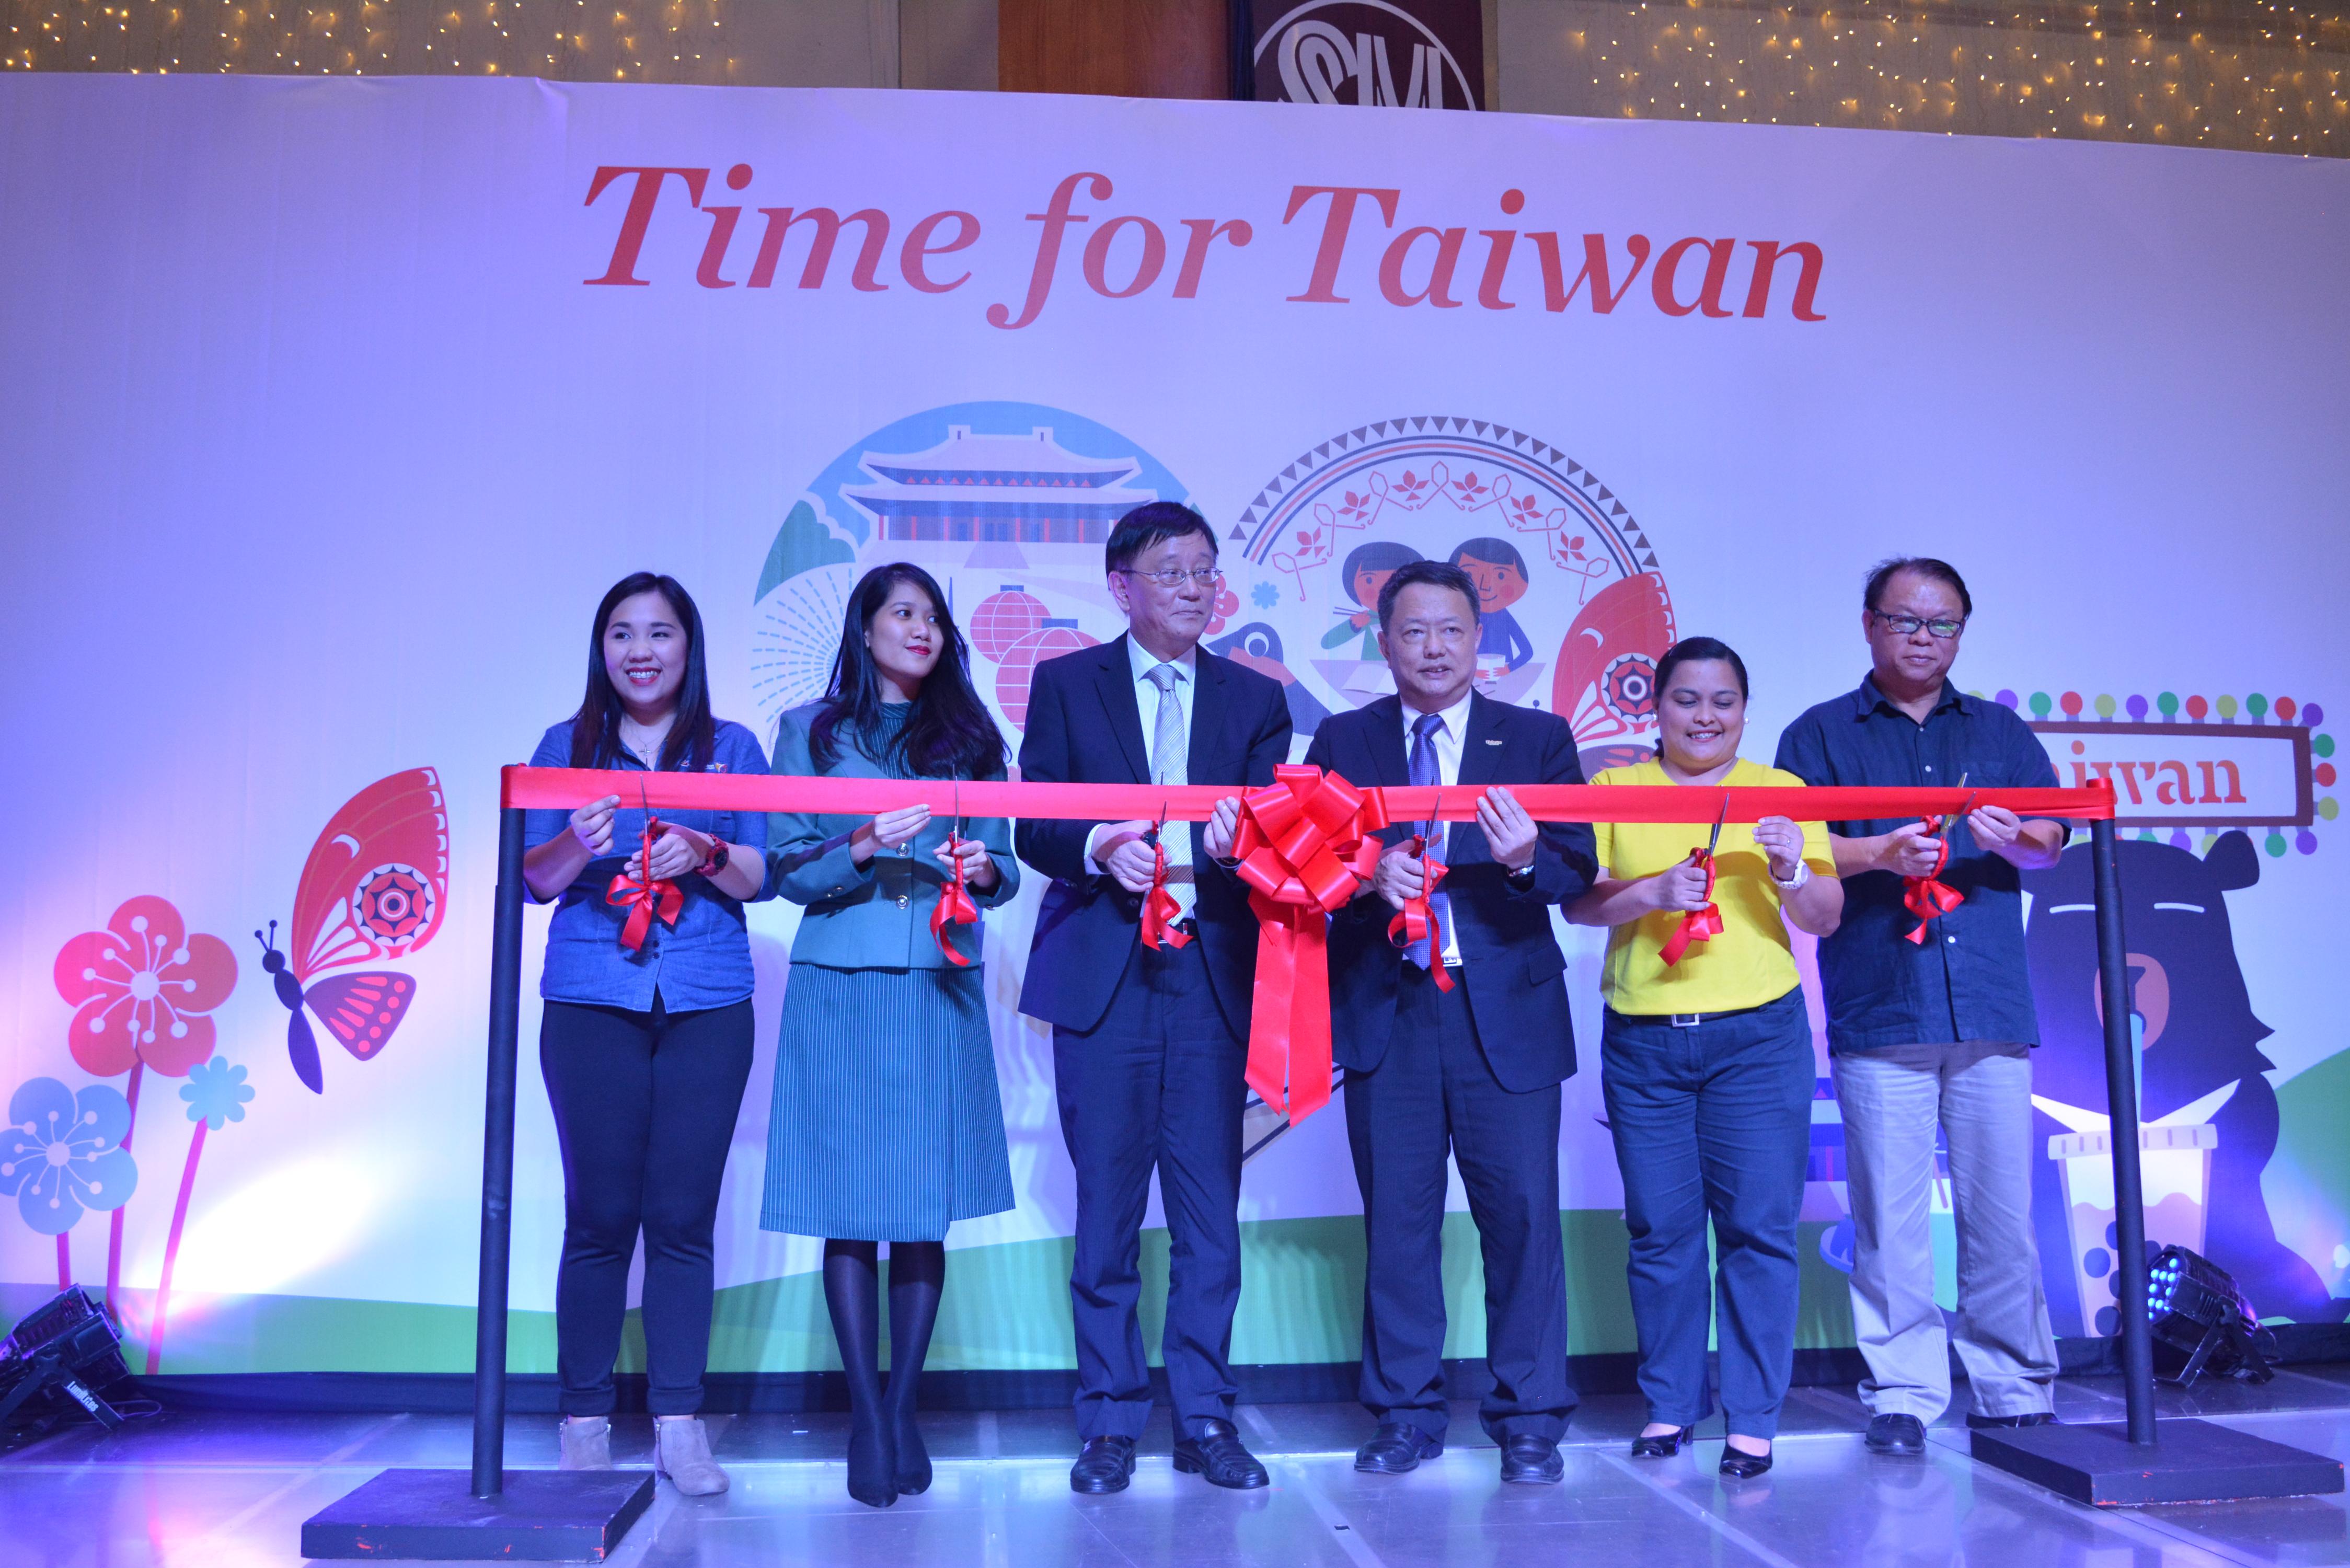 Minister Samson Chang, Deputy Representative, TECO in the Philippines, (center) together with Dir. Tsao, Taiwan Tourism Bureau (4th to the left) and participants led the Ribbon-cutting ceremony 